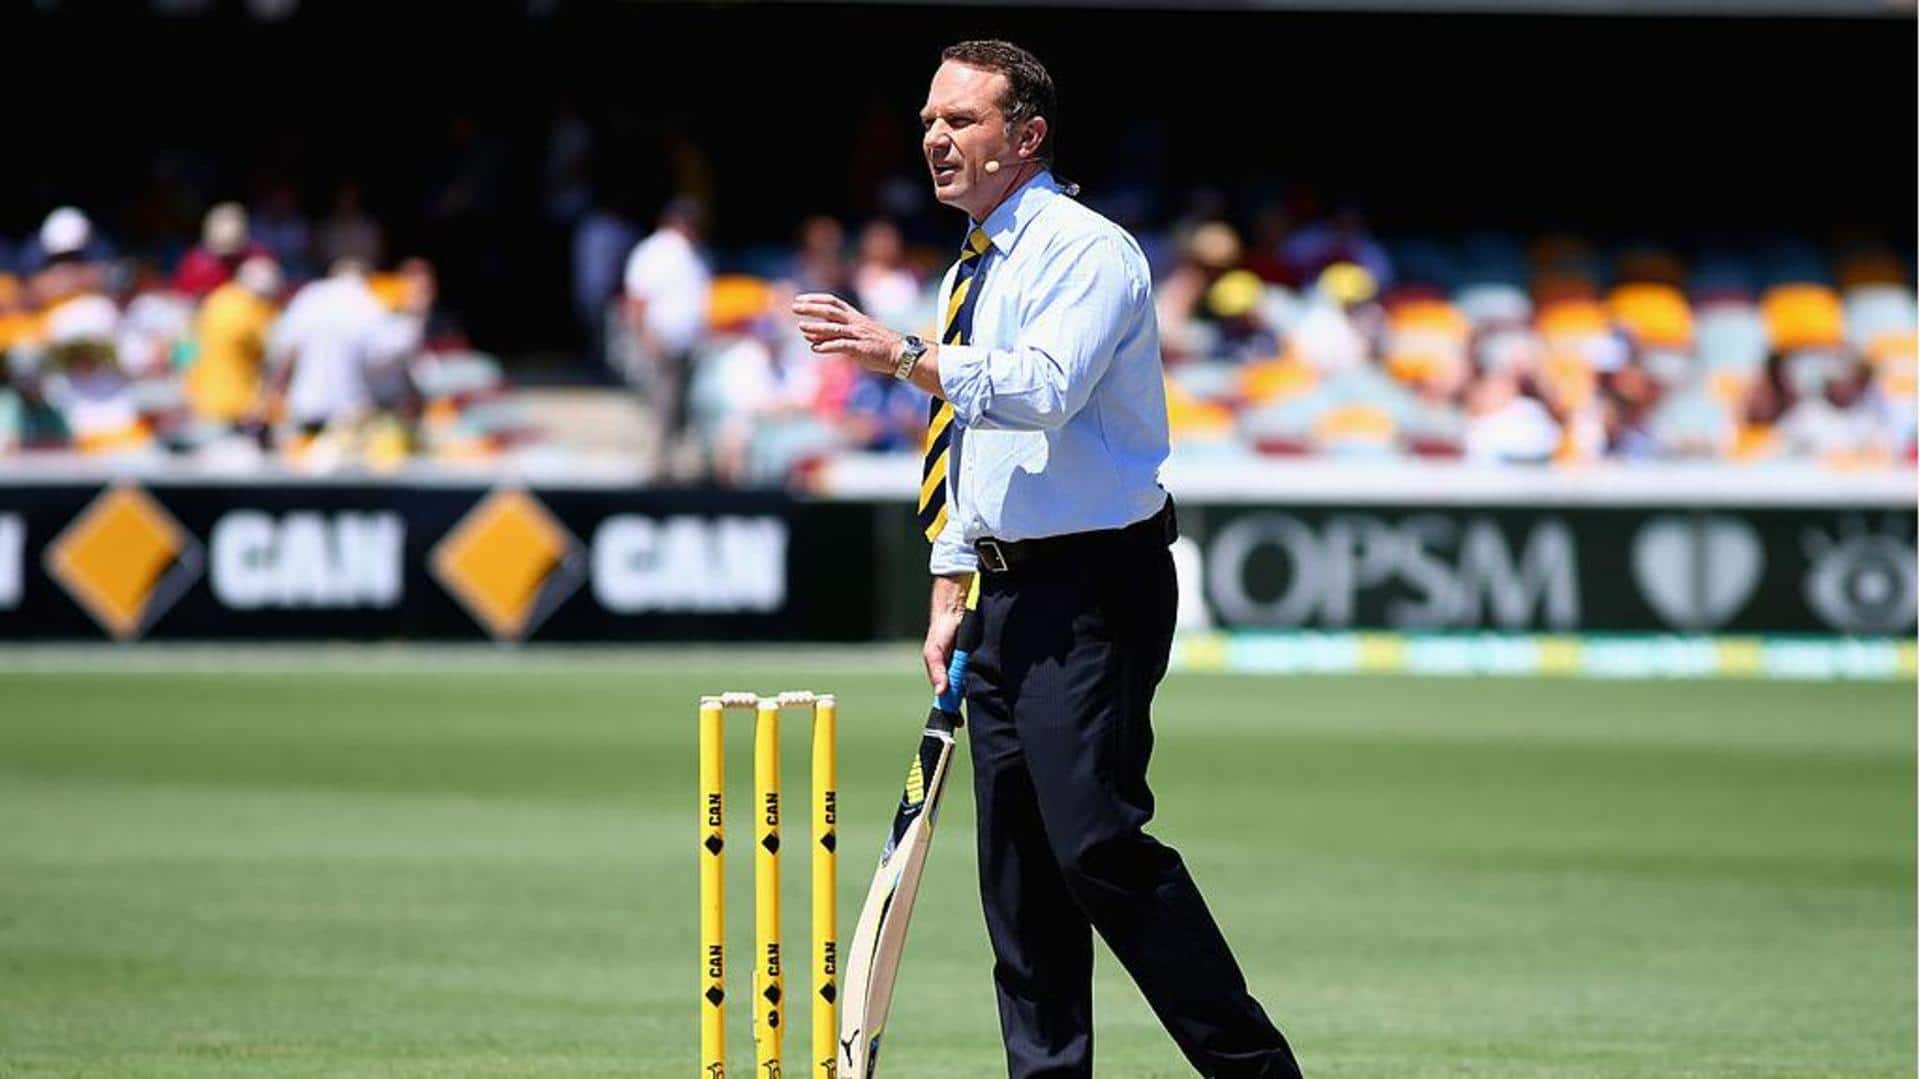 Former Australian cricketer Michael Slater accused of assaulting police: Details 